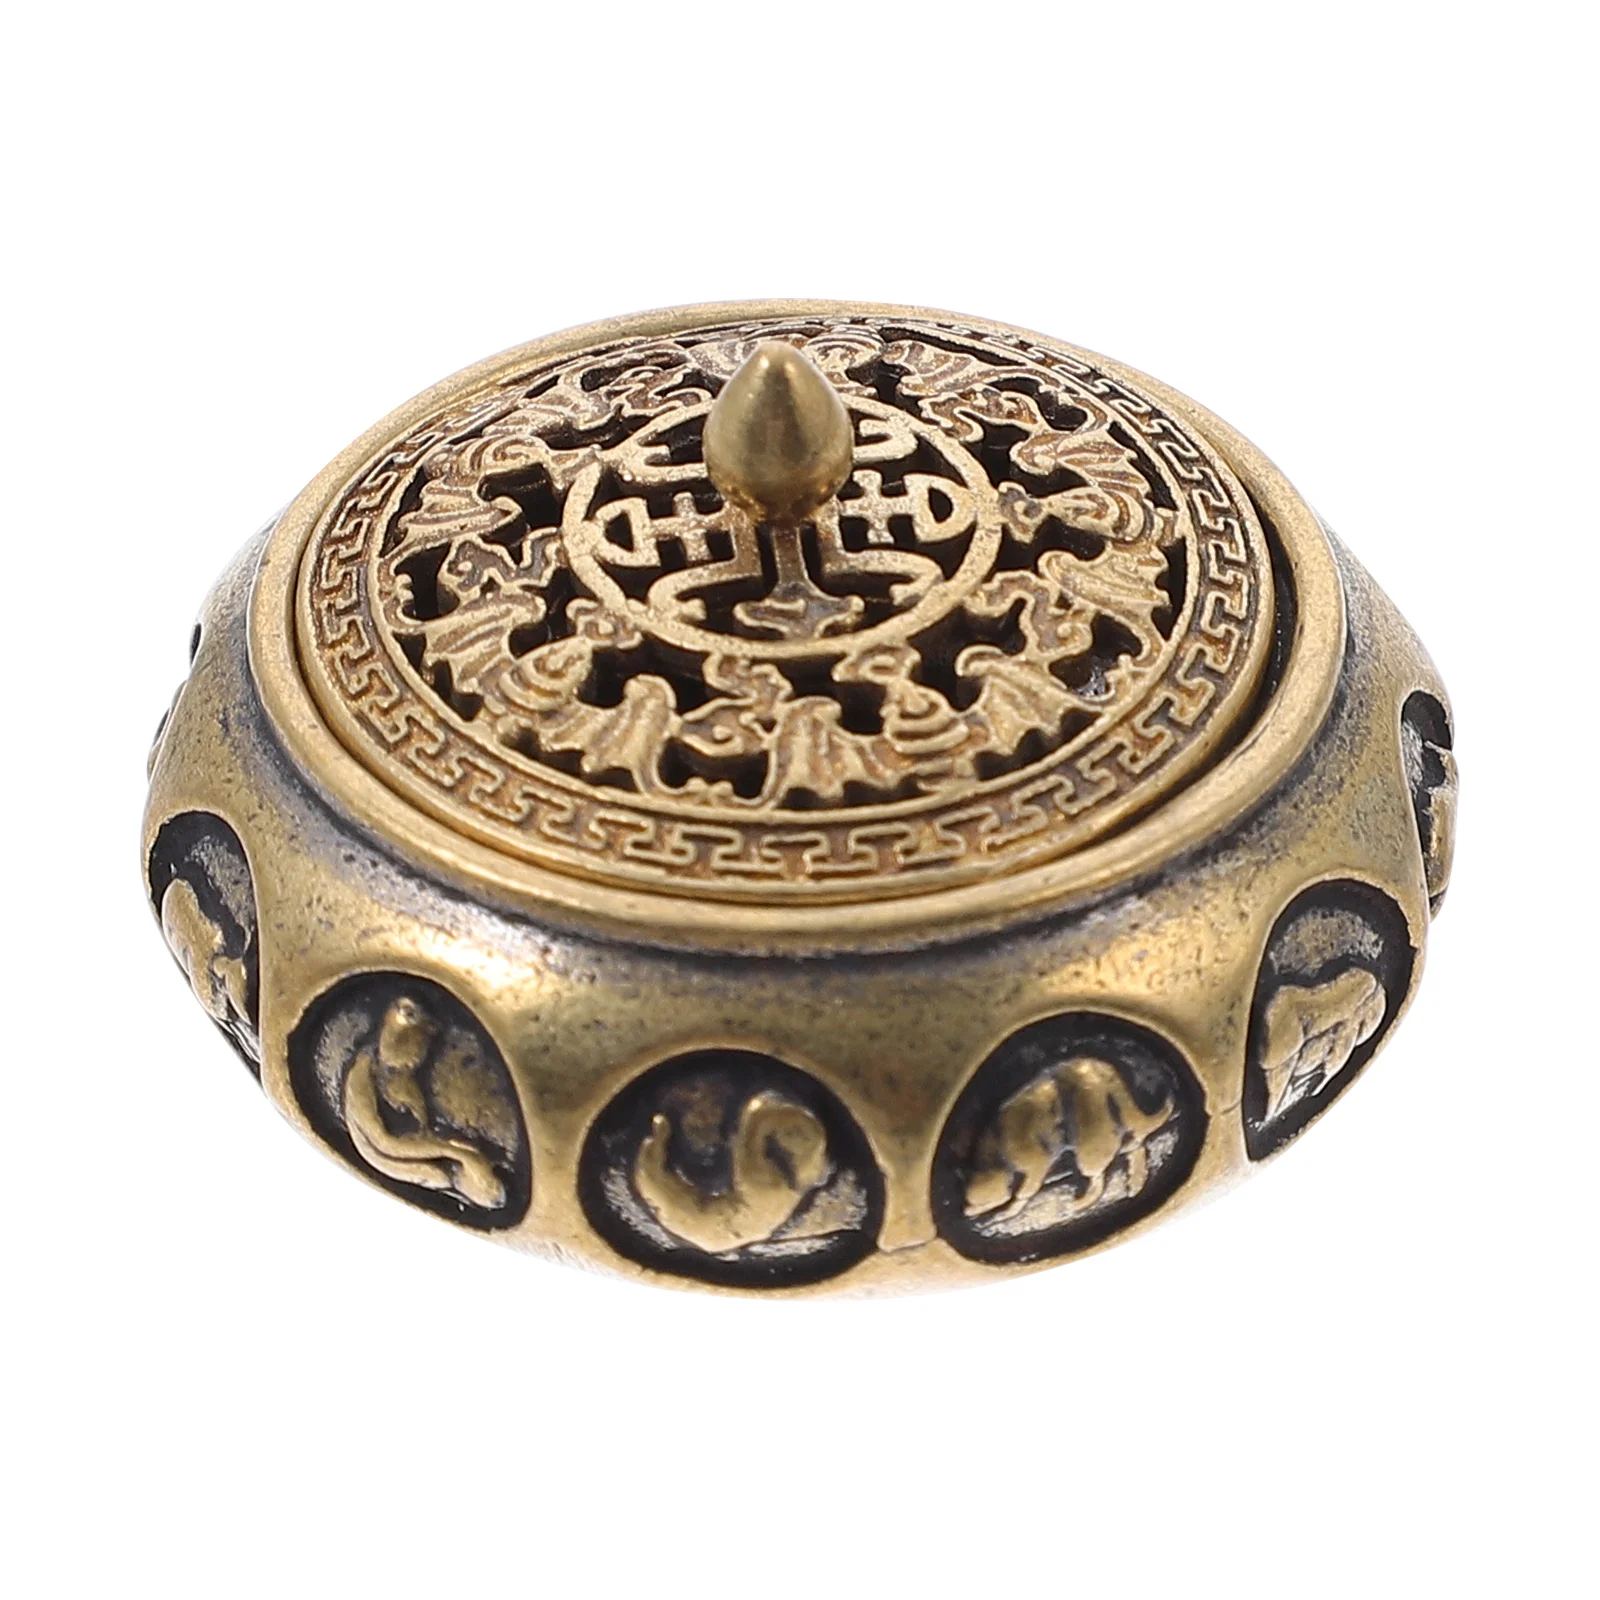 

Burner Chinese Censer Metal Holder Ash Tray Container Aromatherapy Ornamentvintage Furnace Handicraft